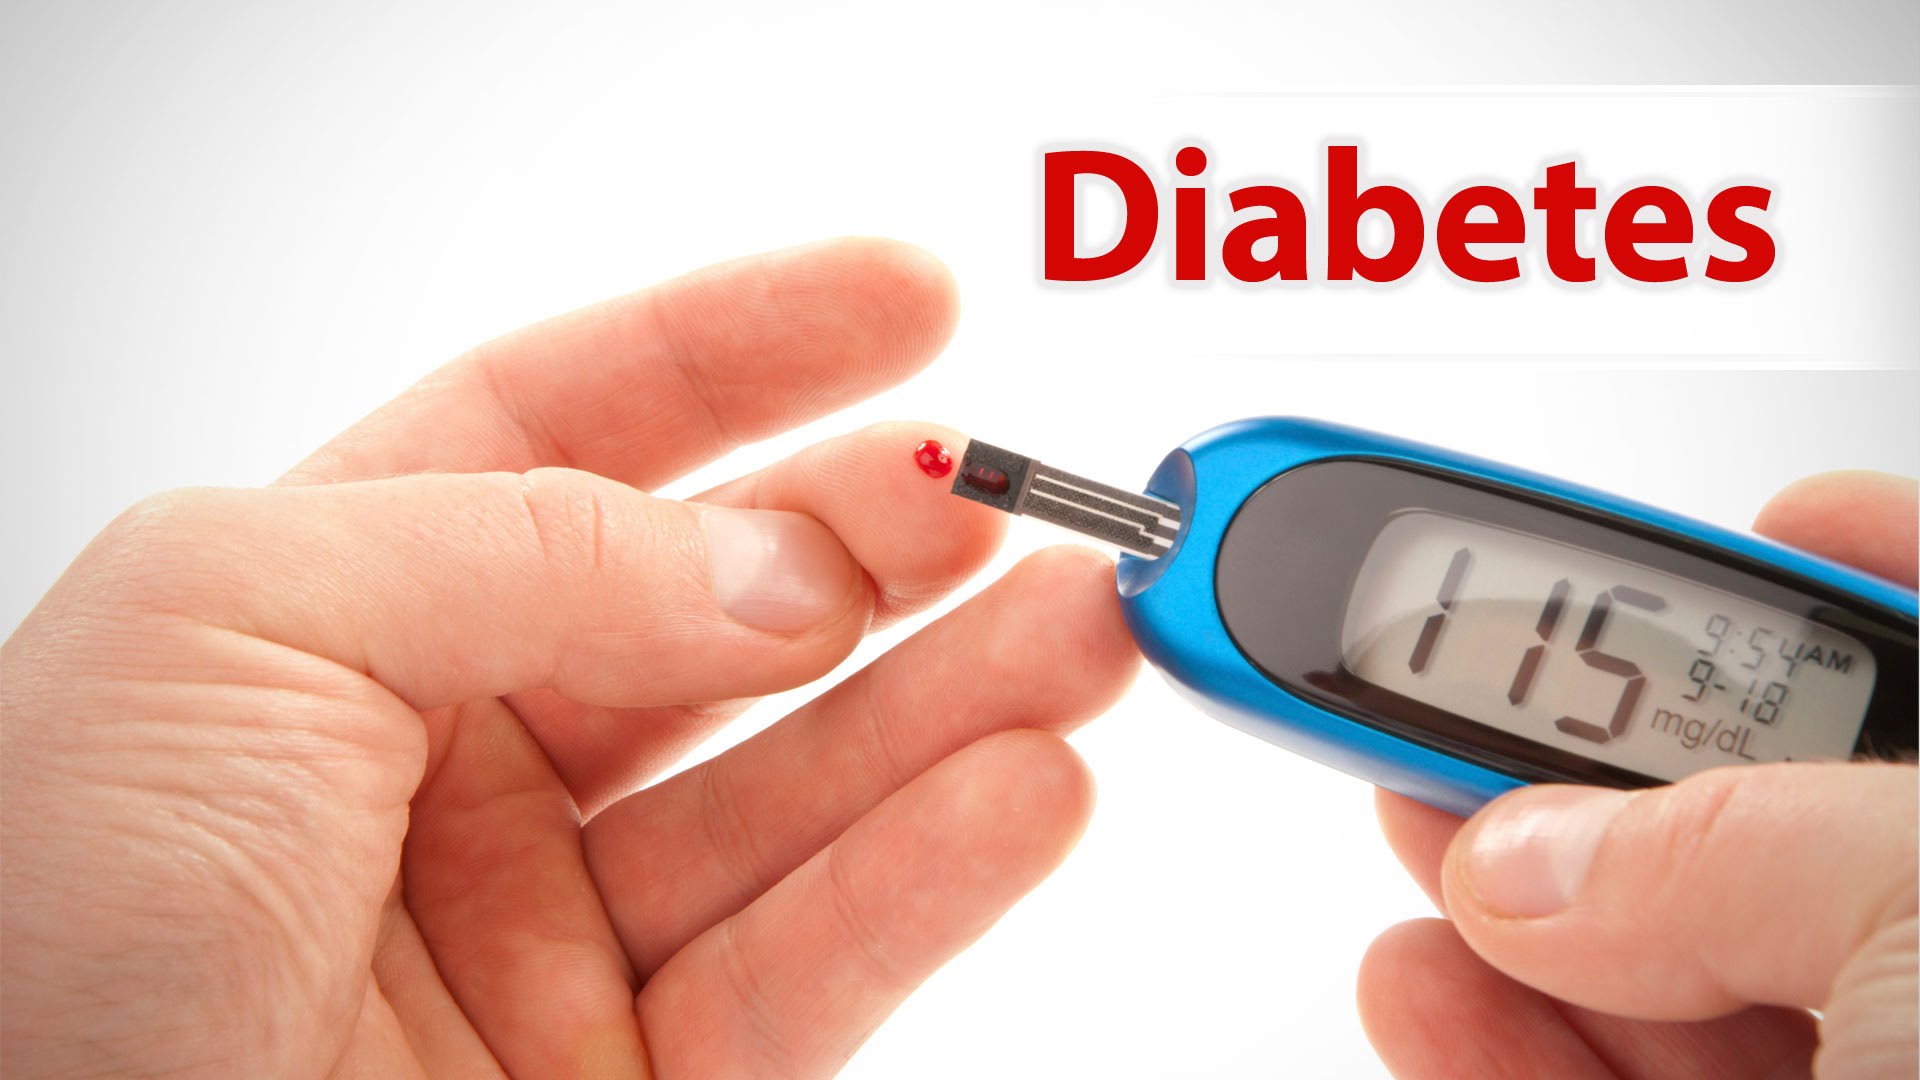 Dr KN Manohar suggests prescribing lifestyle as medicine to manage diabetes. (Wikimedia Commons)